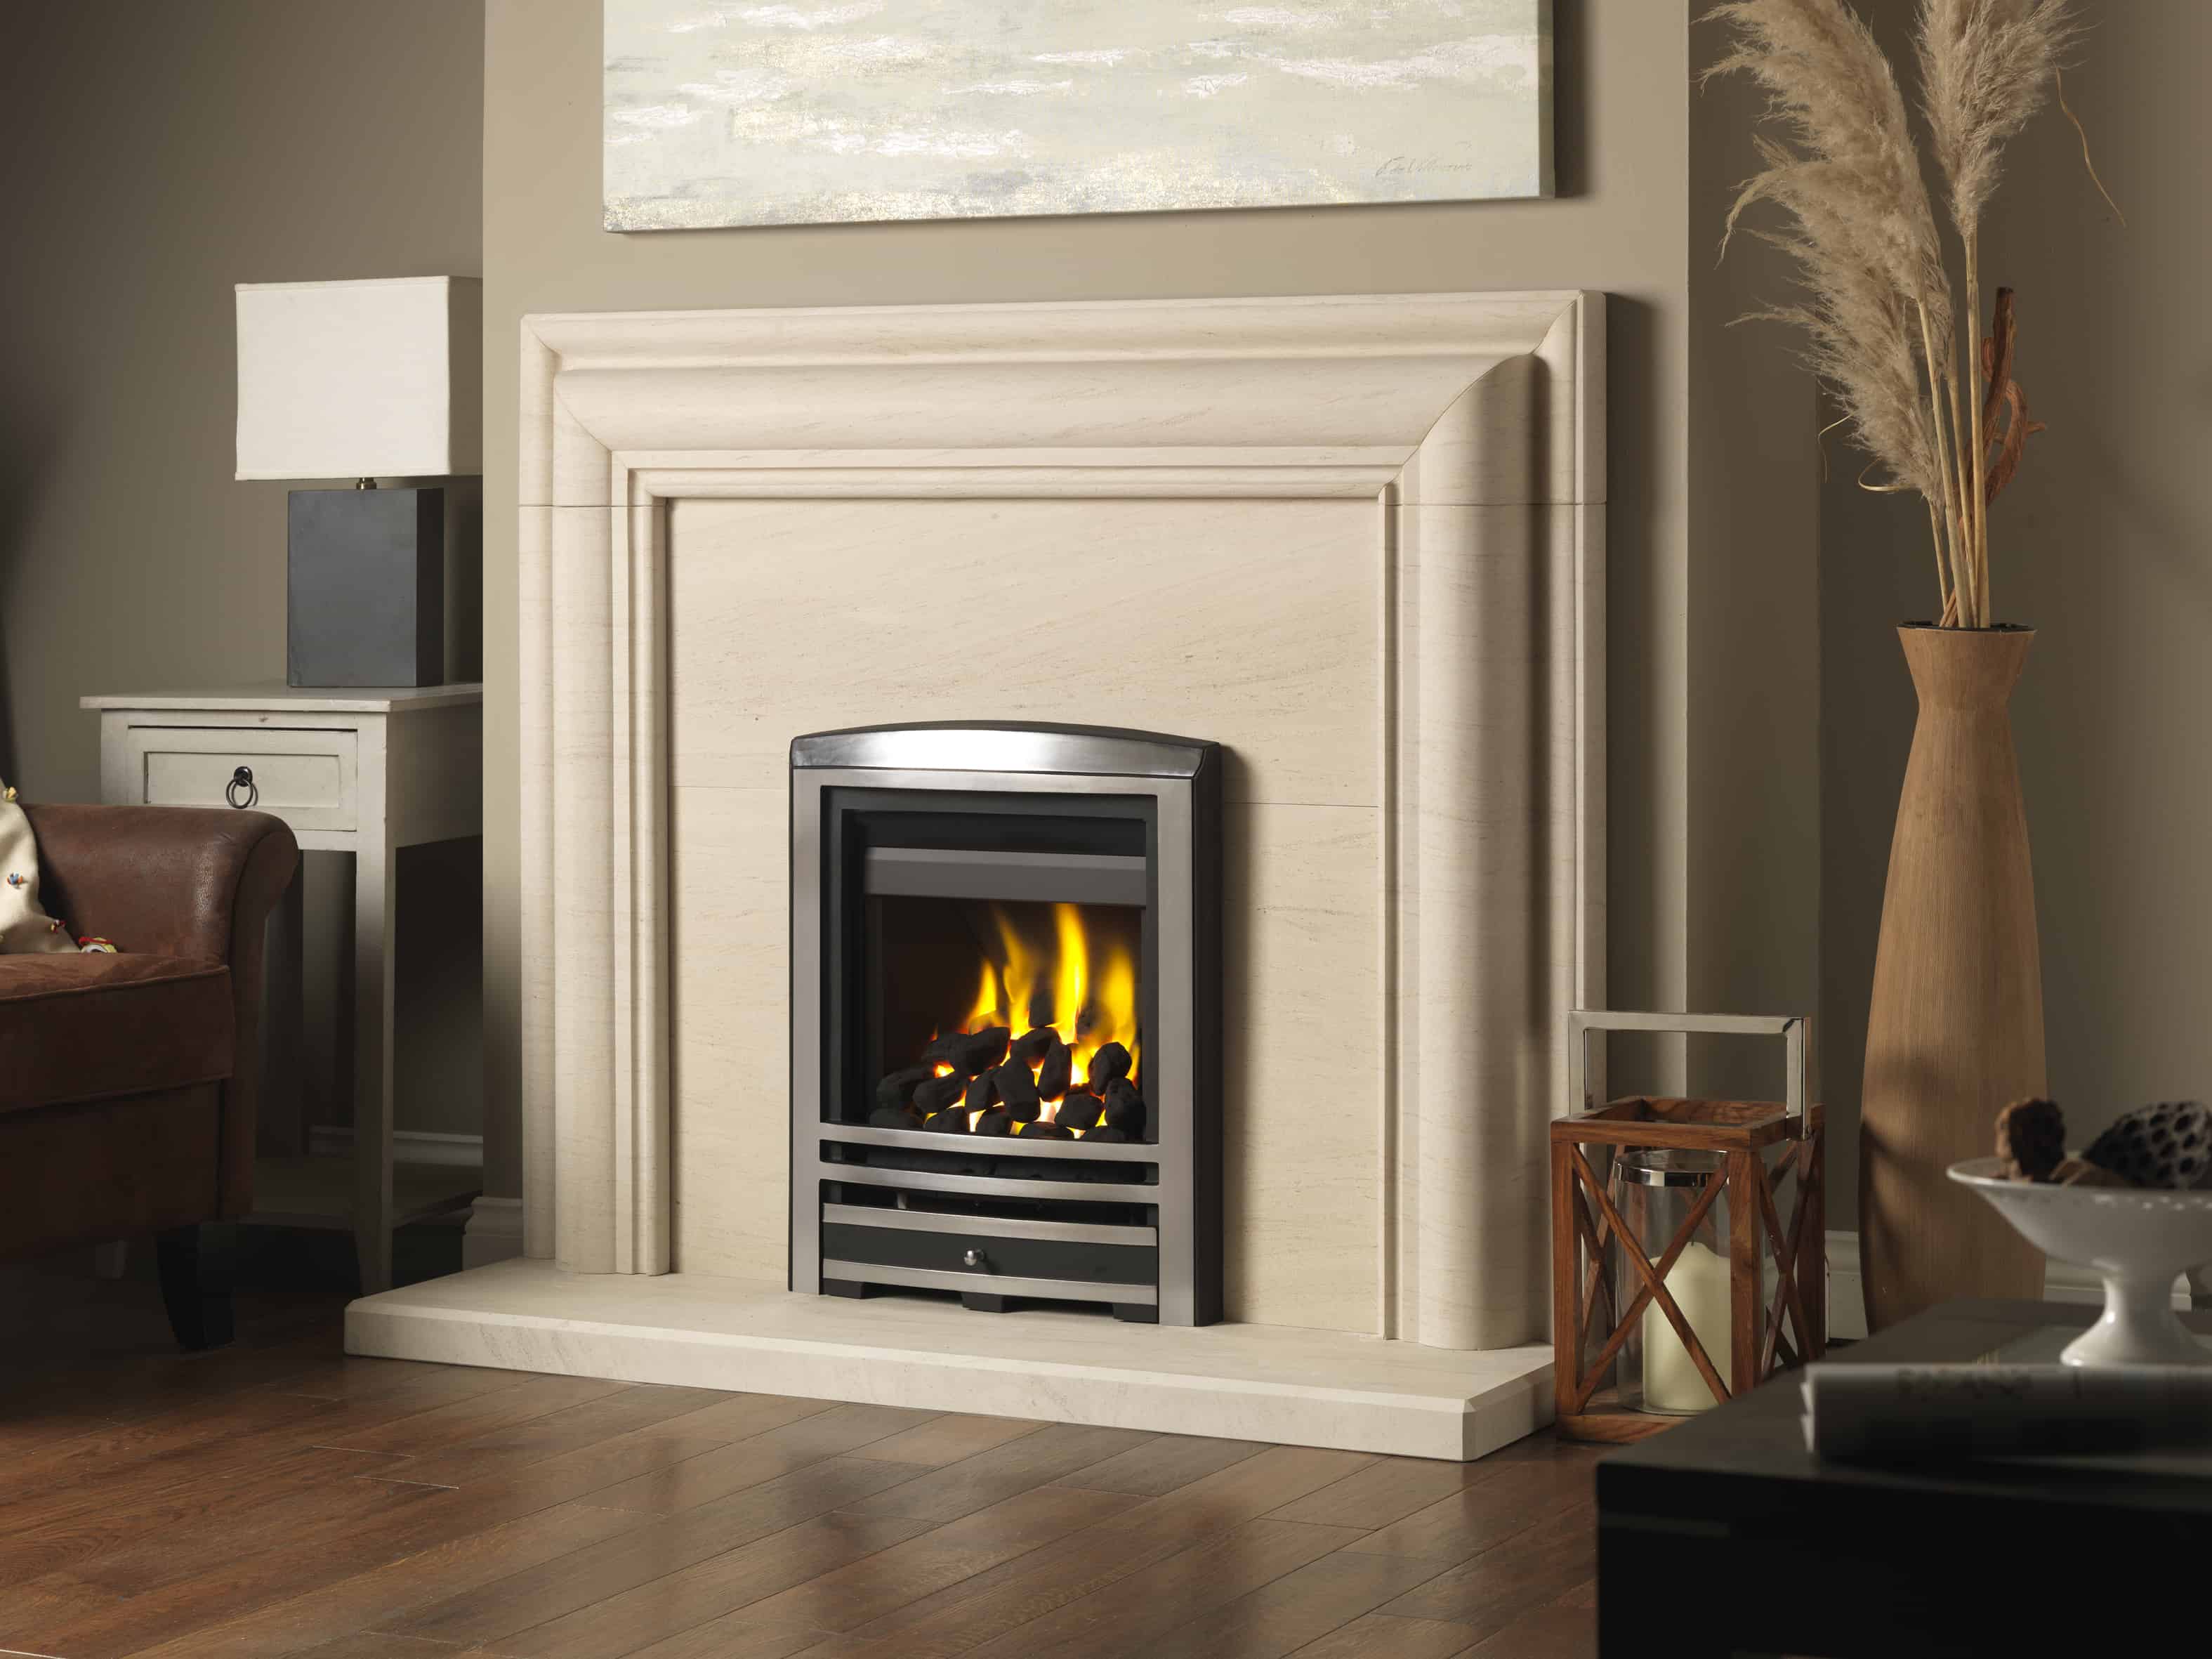 Installing a Limestone or Marble Fireplace